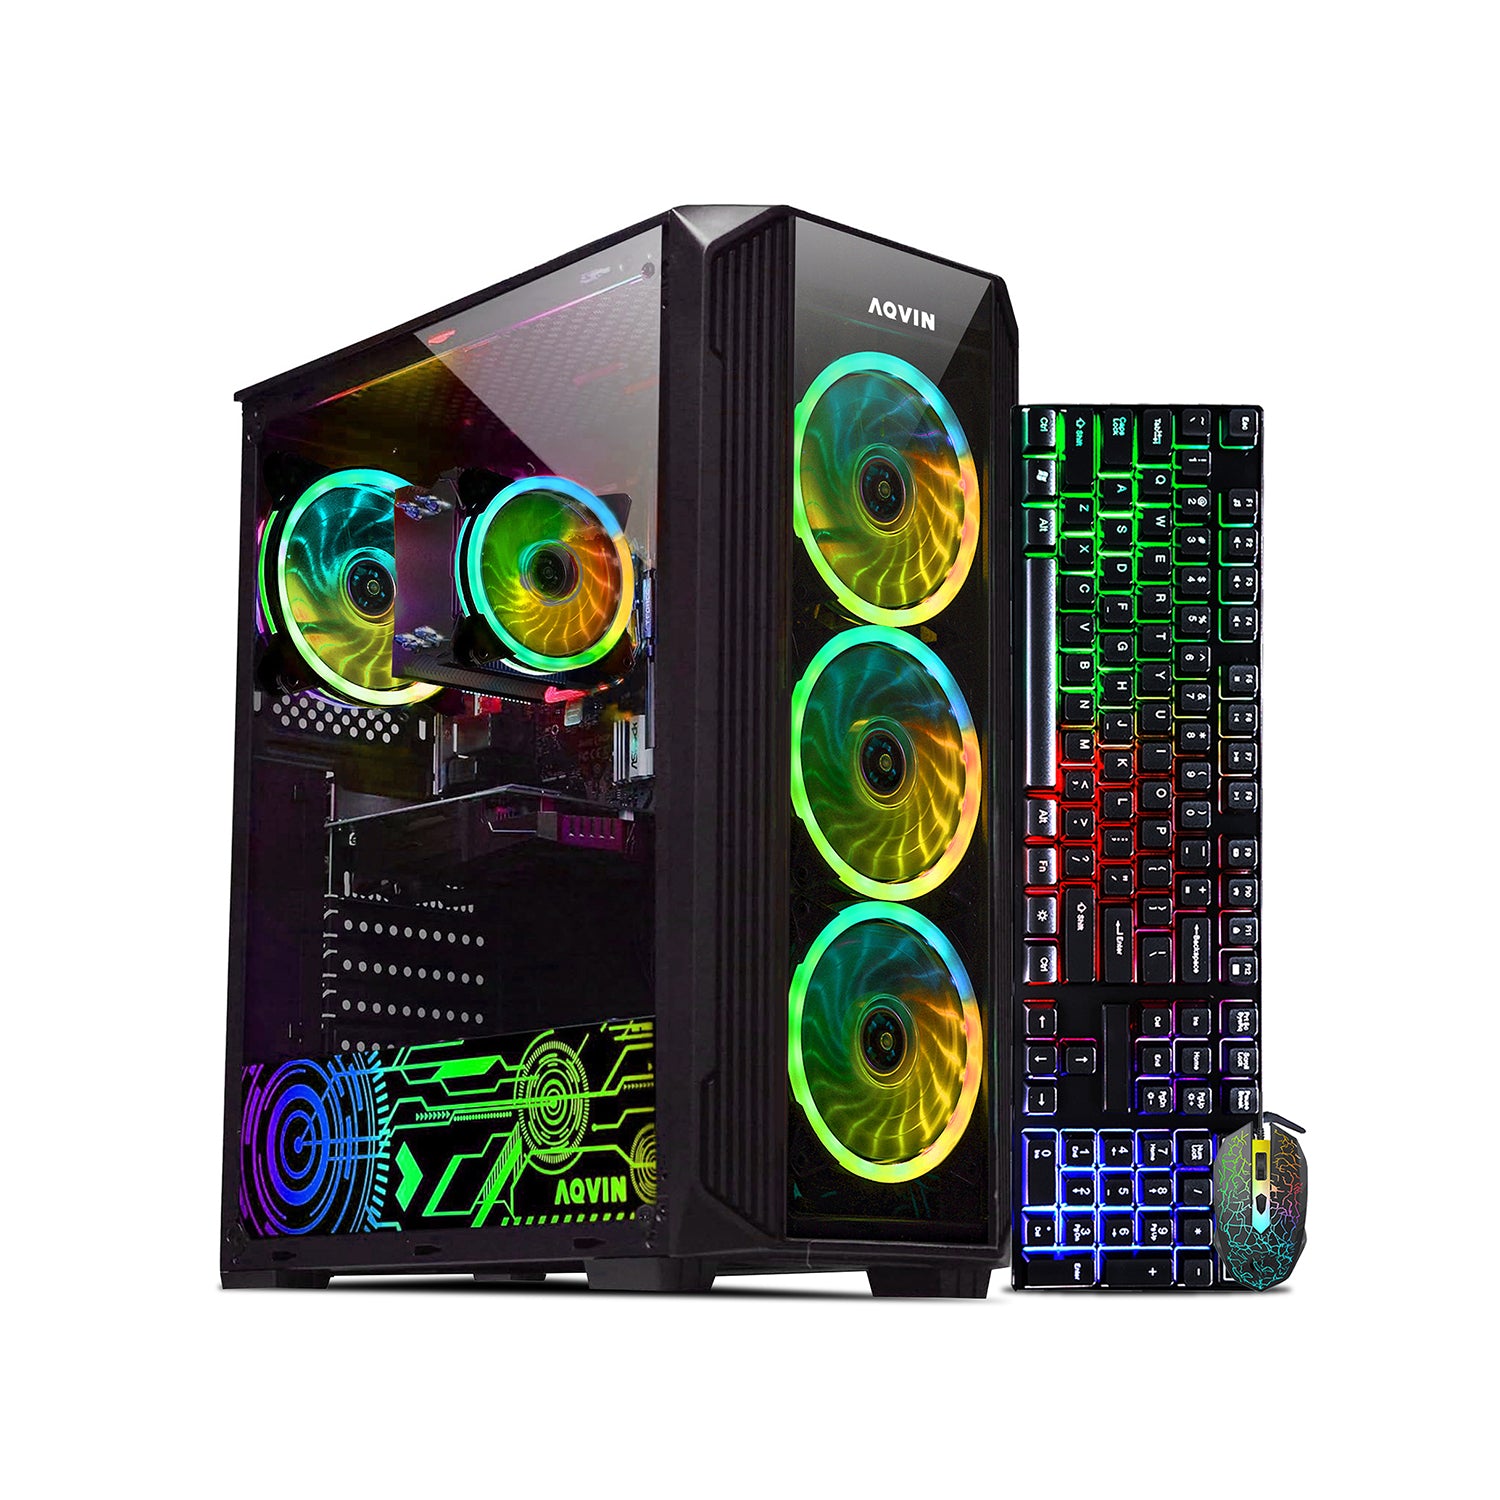 AQVIN Z-Force Gaming Desktop Tower Computer - RGB (Intel Core i7 up to 4.60 GHz/ 1TB - 2TB SSD (fast boot)/ 32GB DDR4 RAM/ RTX3050,3060/ Windows 11 Pro/ Gaming Keyboard and Mouse) WIFI